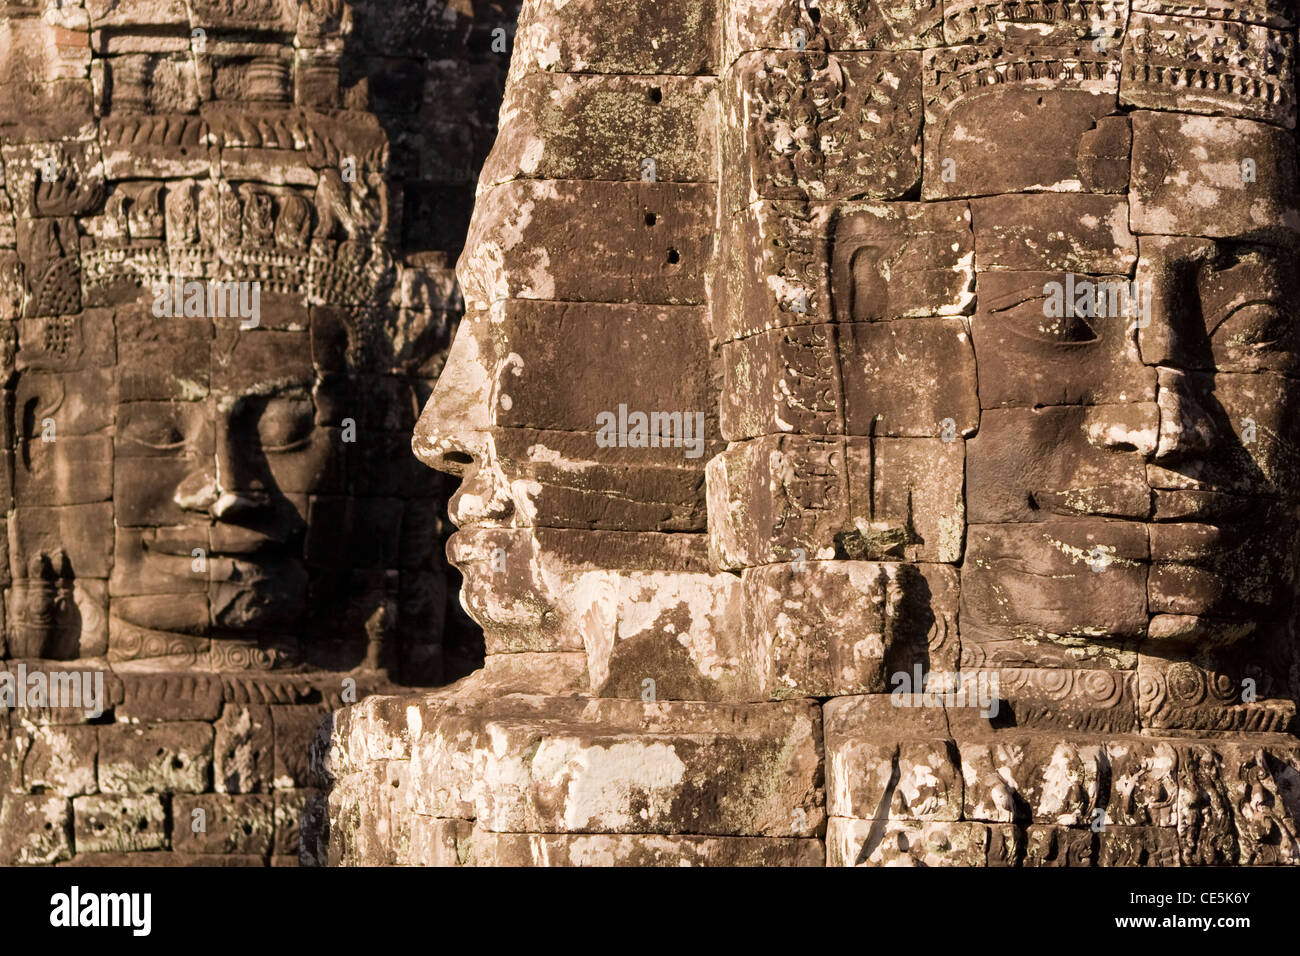 The giant stone faces at the temple of Bayon in Angkor, Cambodia. Stock Photo